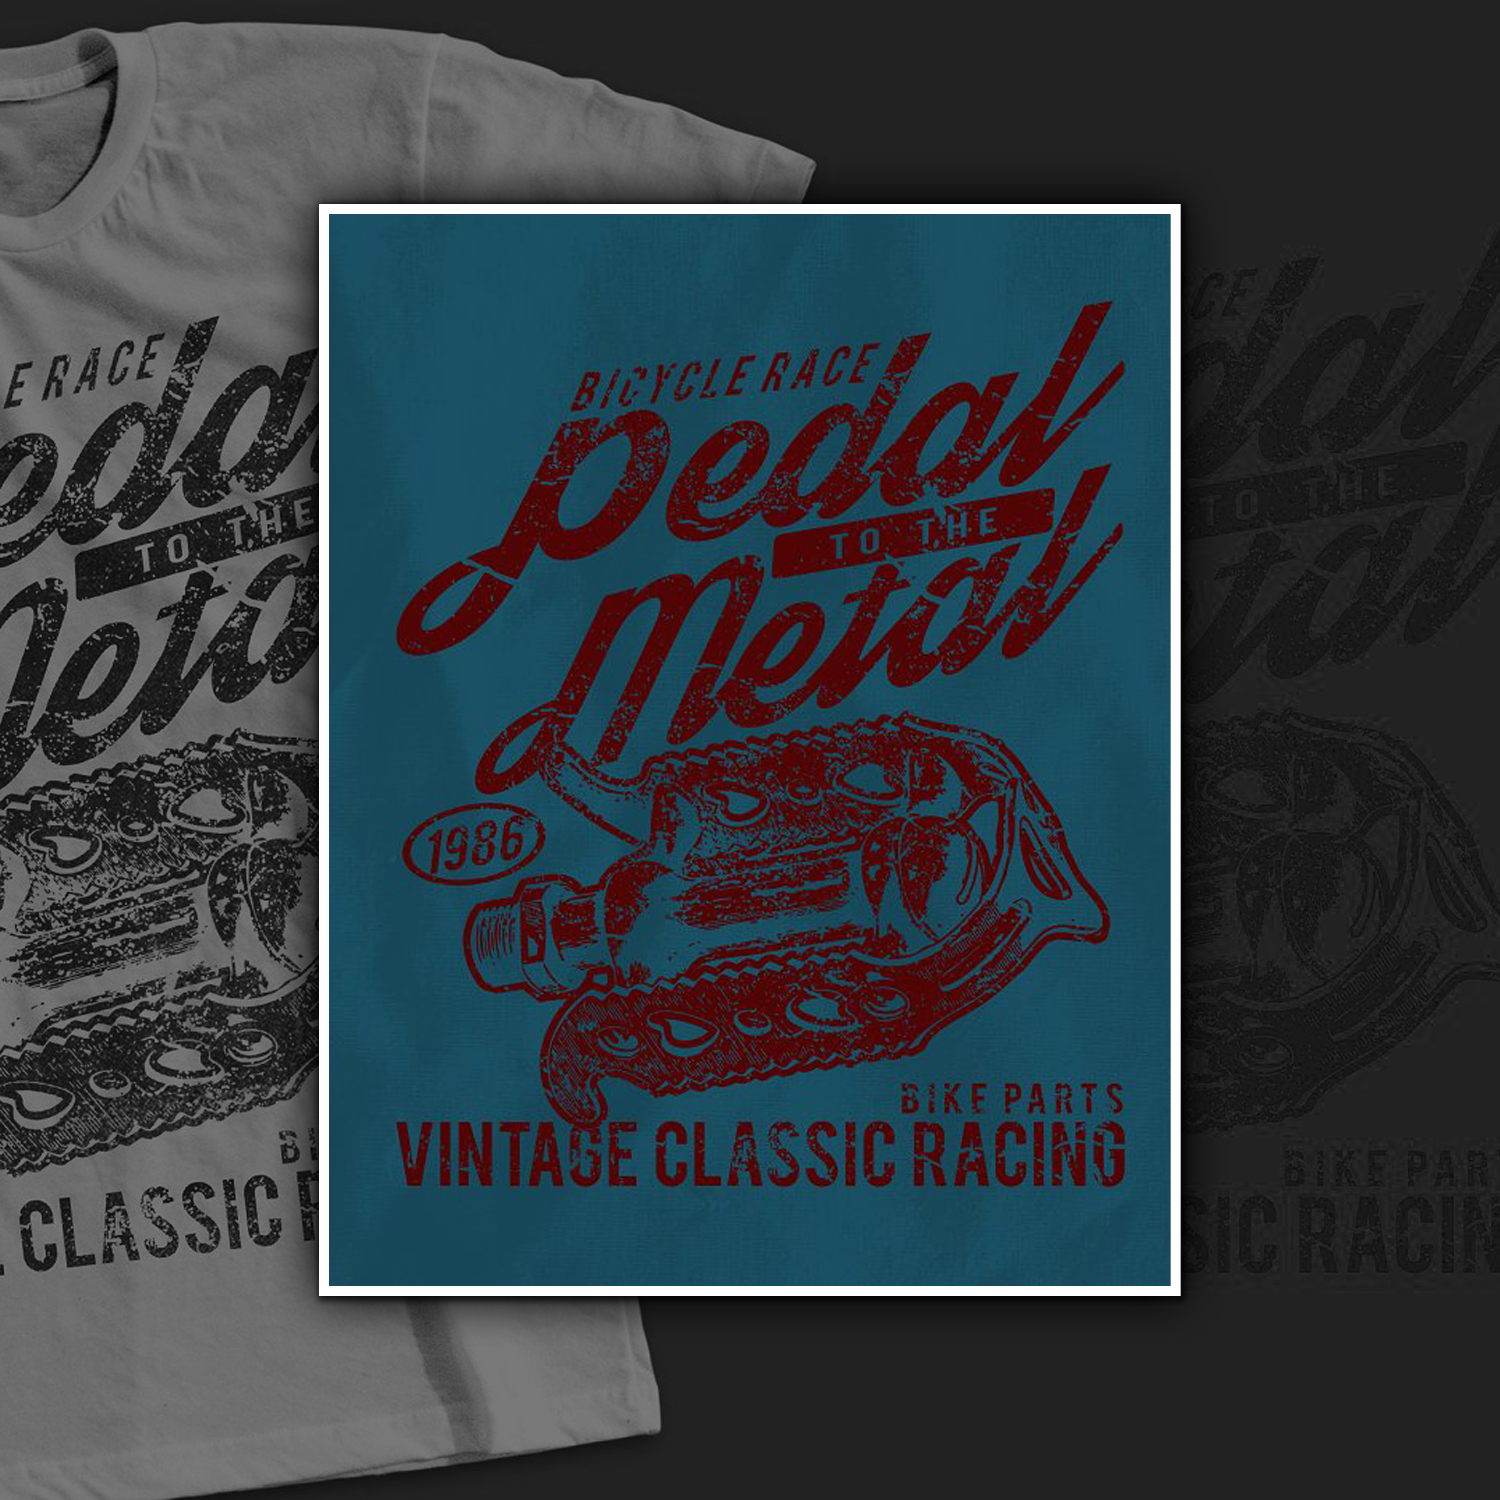 Preview pedal to the metal t shirt design.